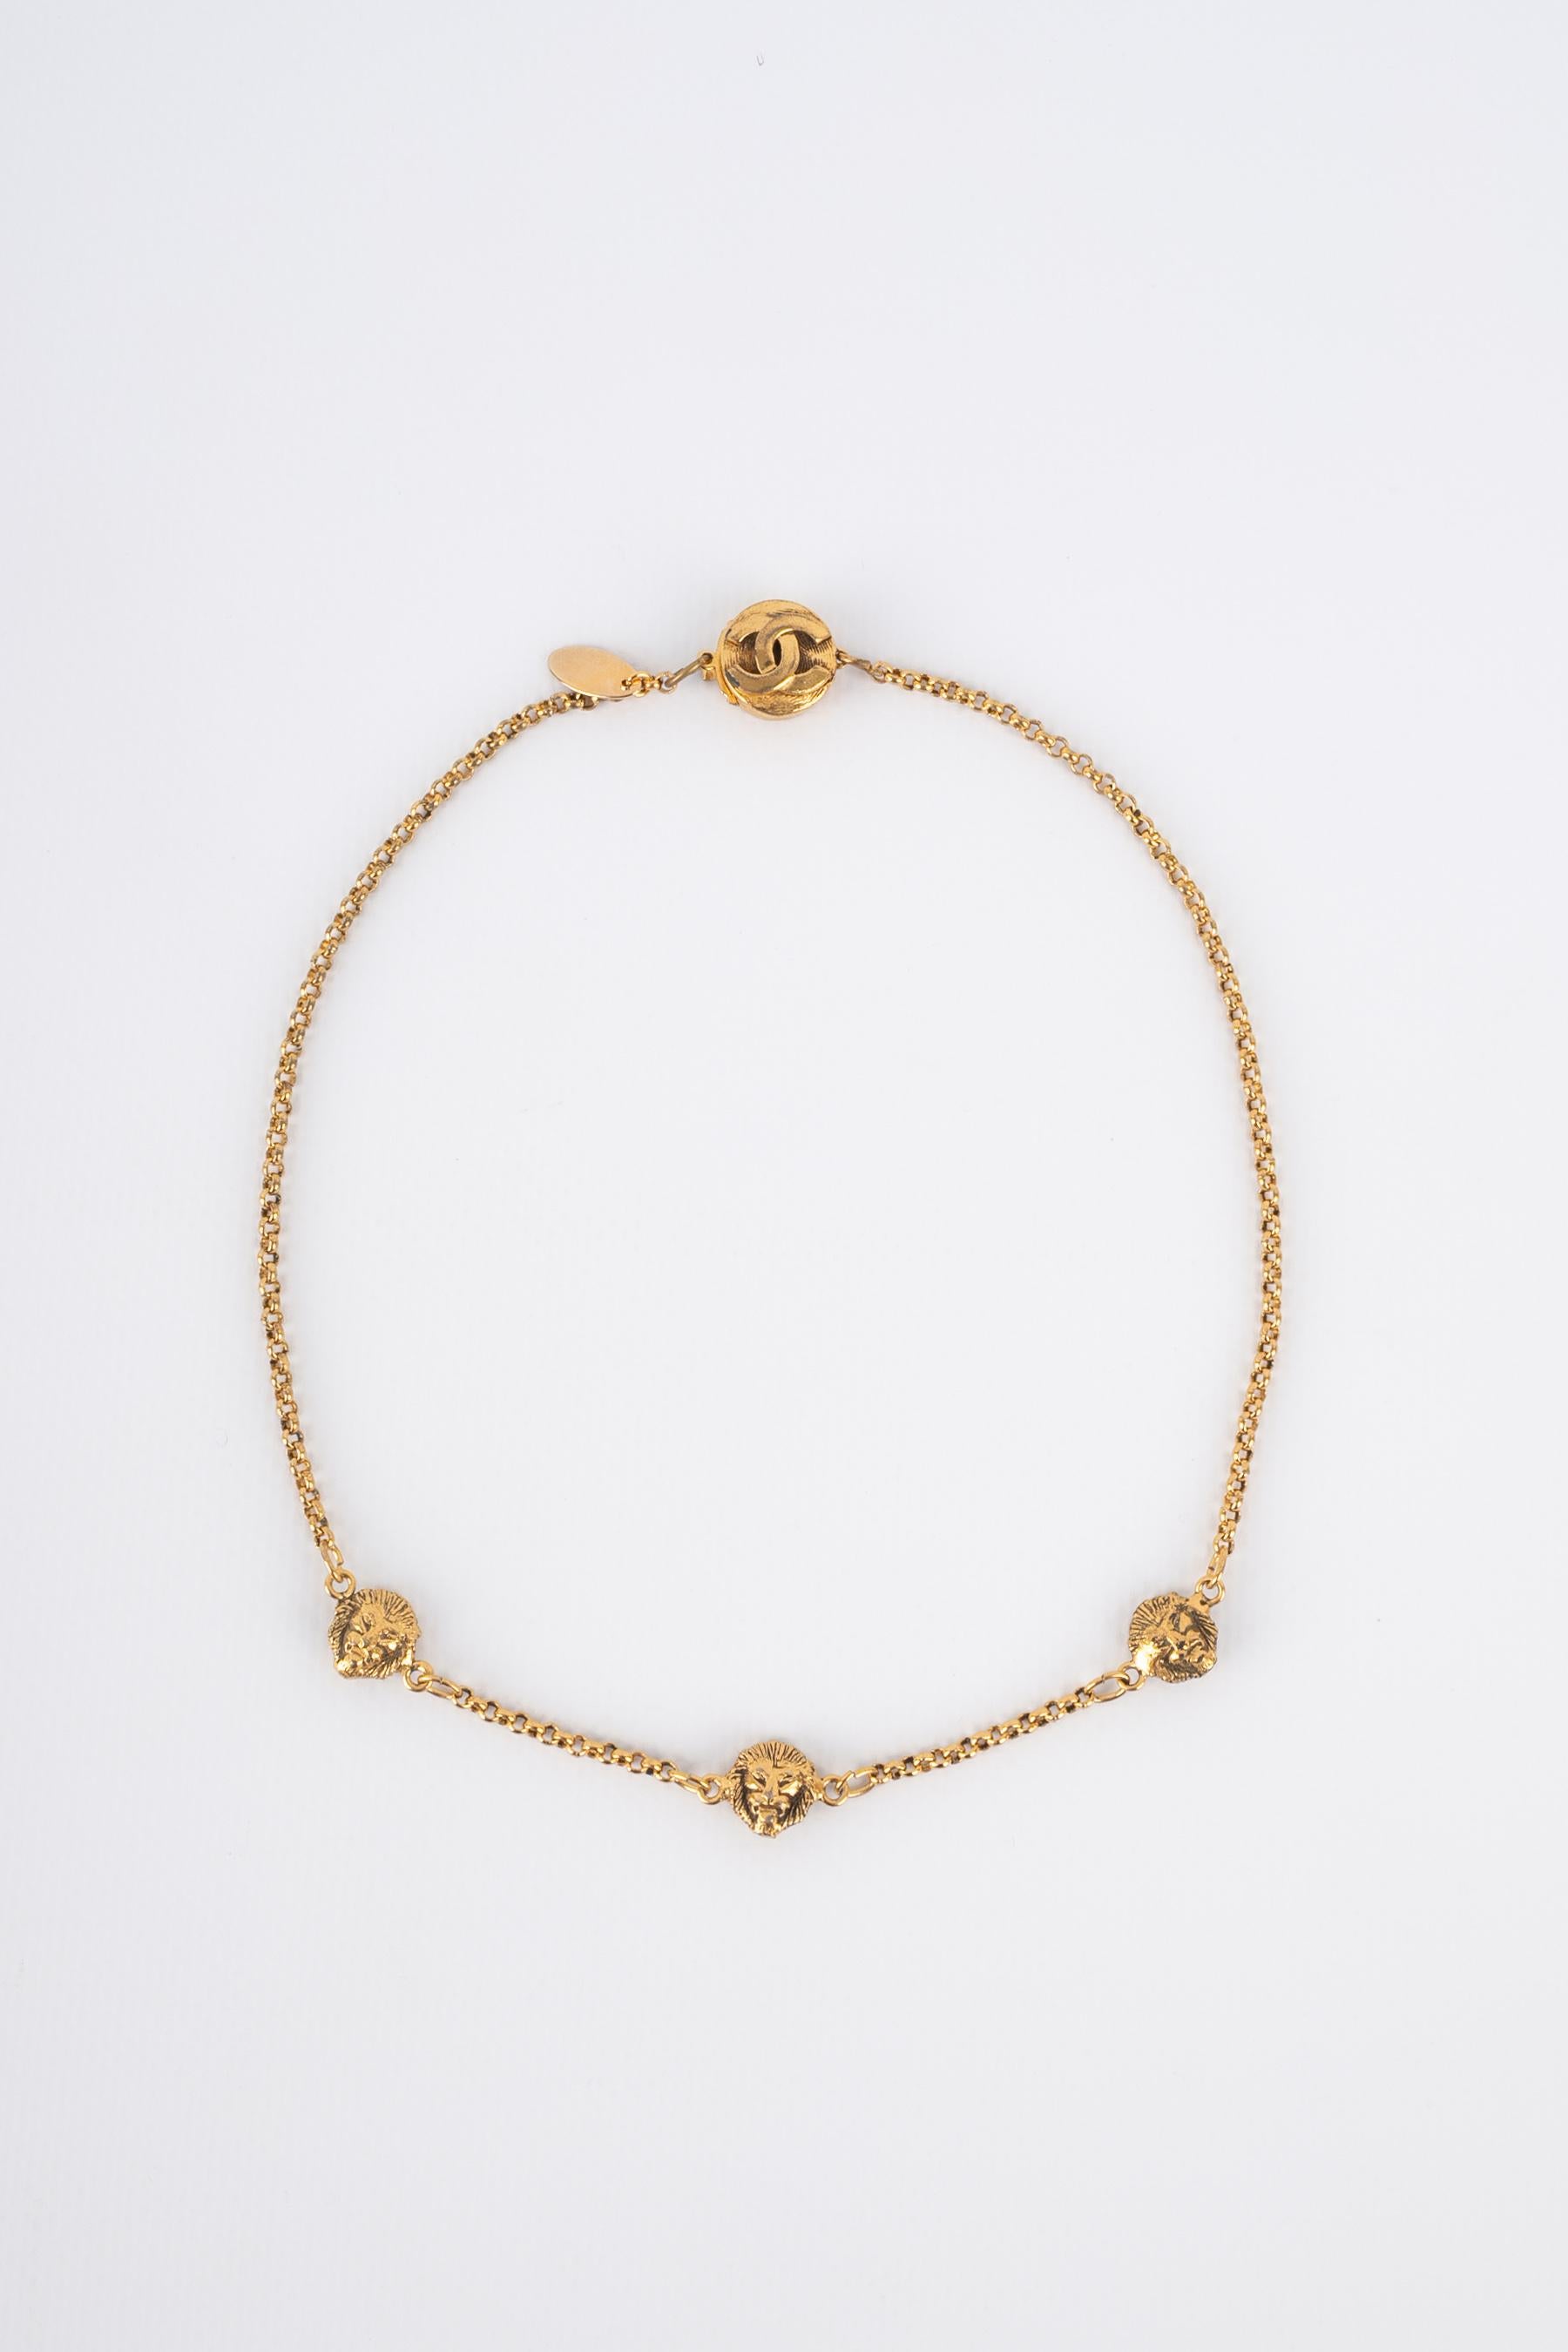 CHANEL - (Made in France) Golden metal short necklace representing lion heads. Jewelry from the 1980s.

Condition:
Very good condition

Dimensions:
Length: 39 cm

CB275